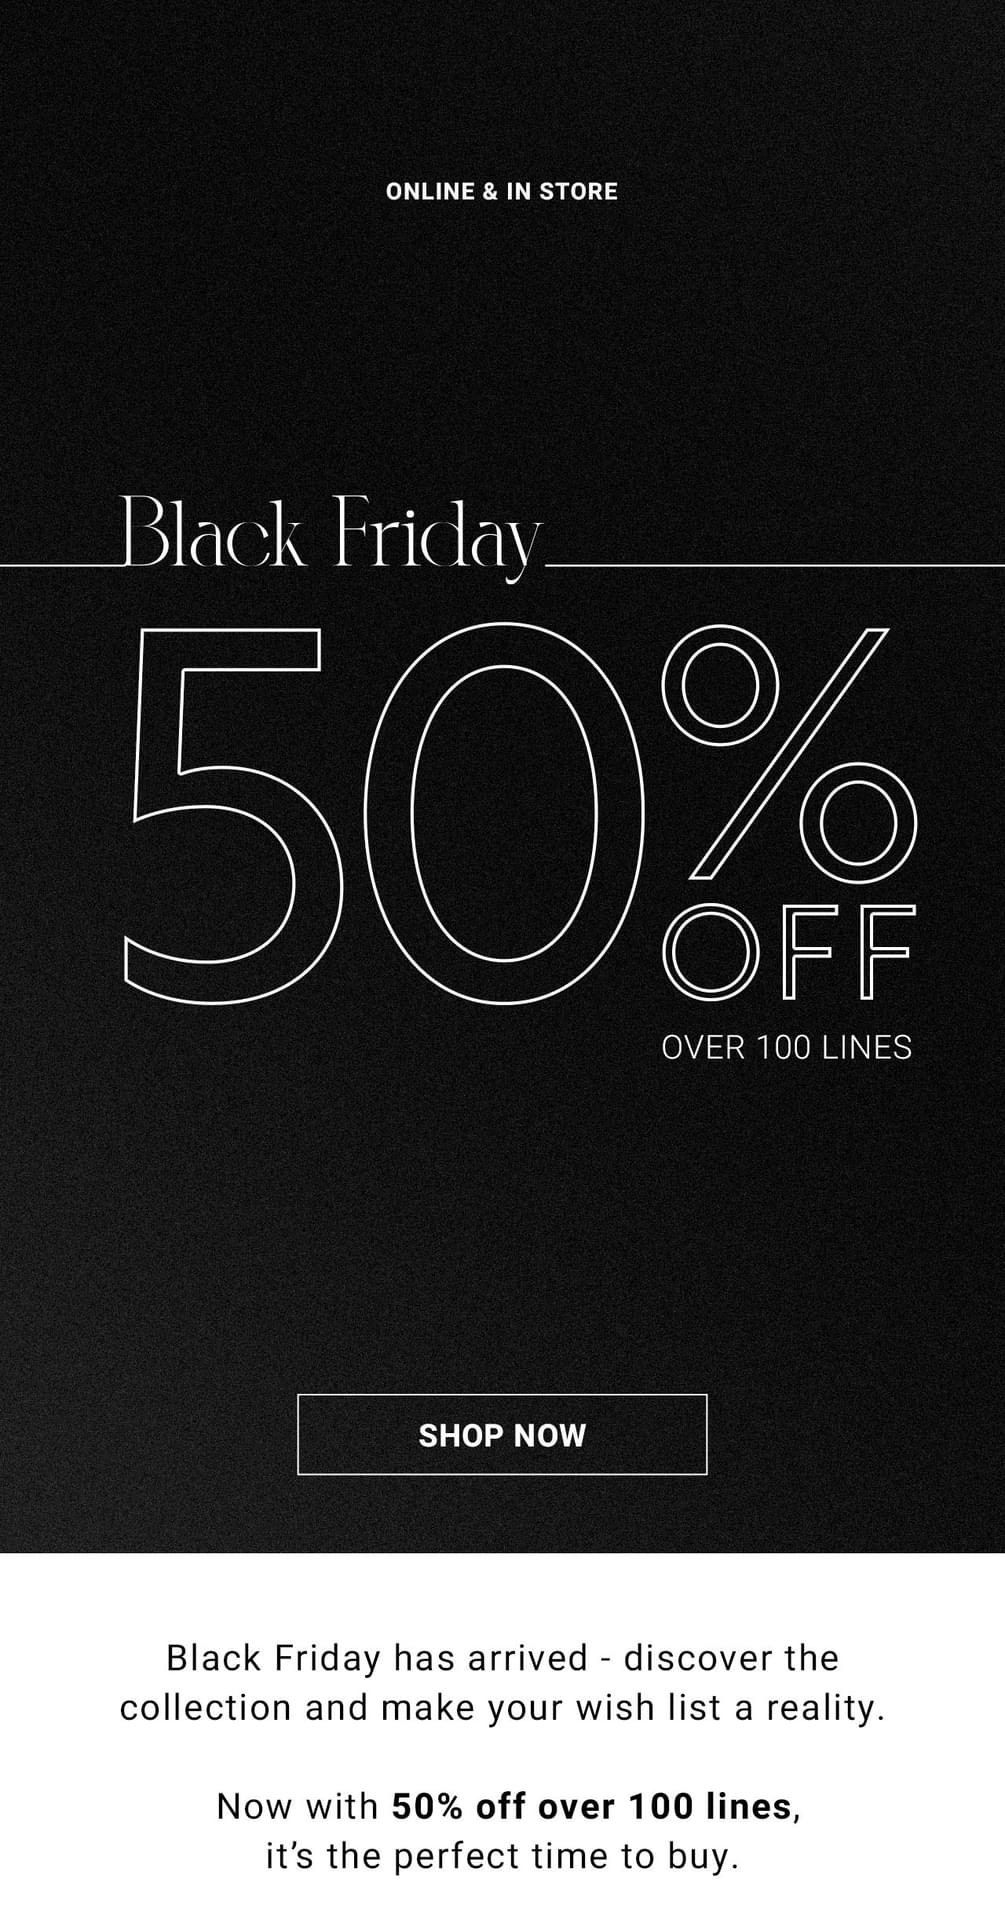 Black Friday Online & In store